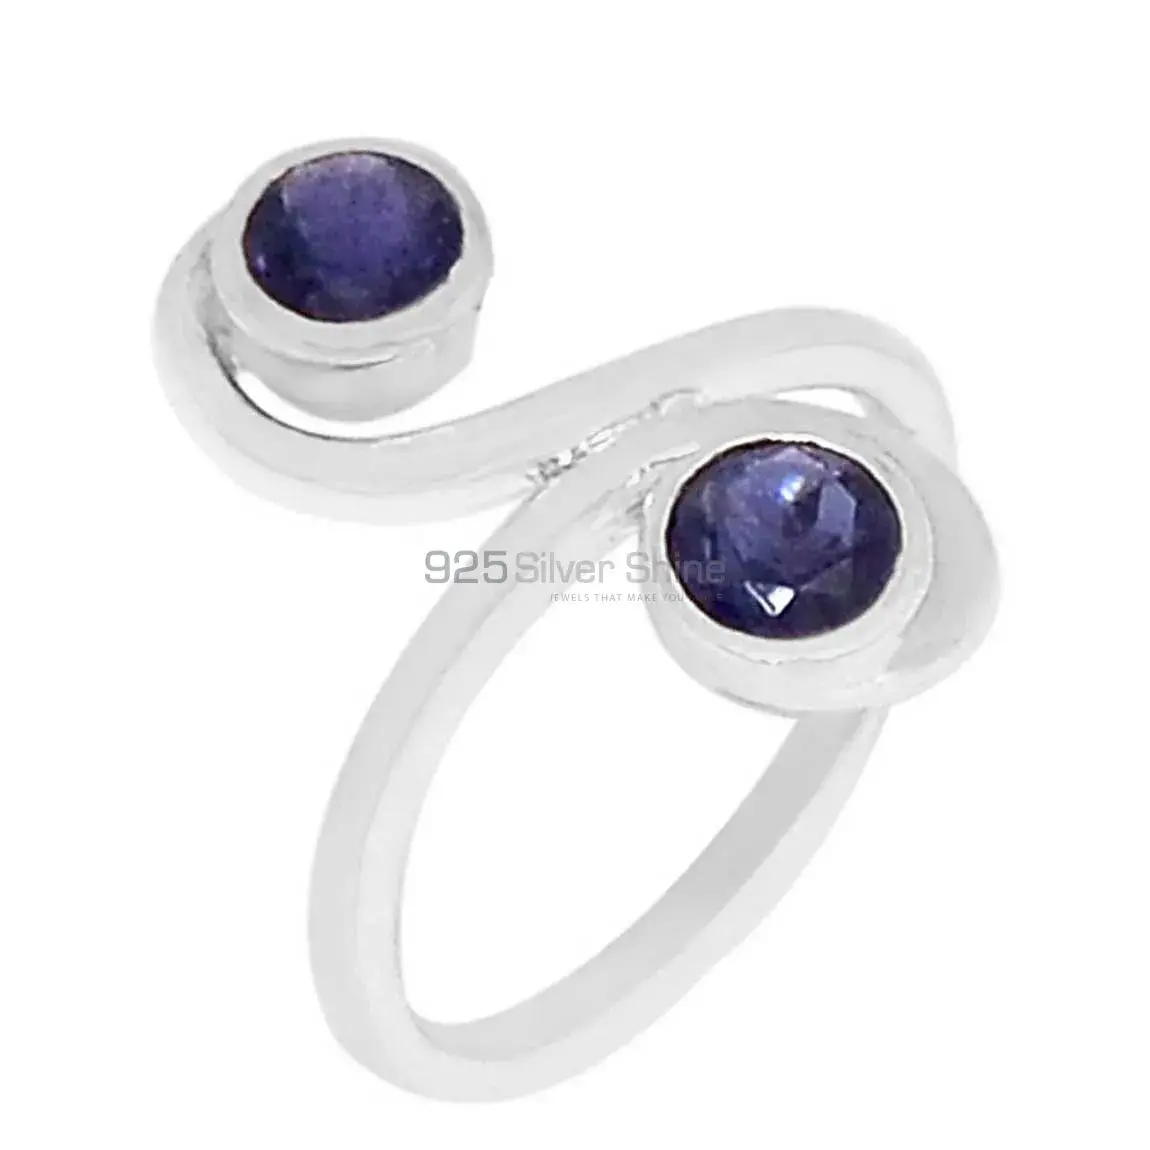 Handmade Sterling Silver Faceted Iolite Gemstone Ring Jewelry 925SR2310